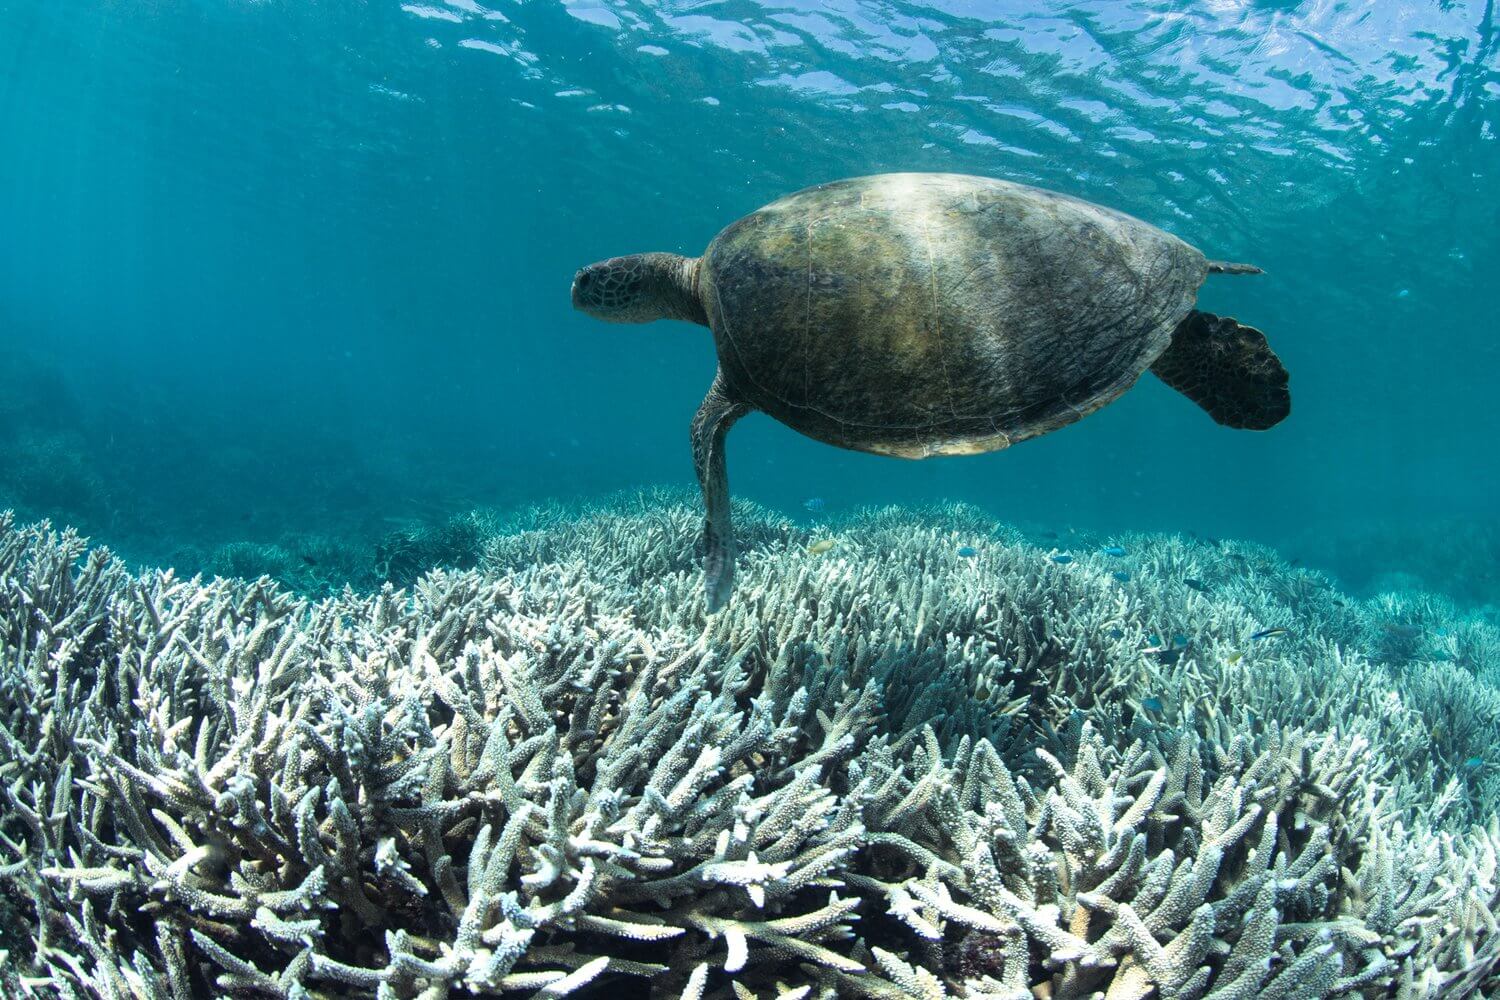 A turtle swimming over bleached coral reef.